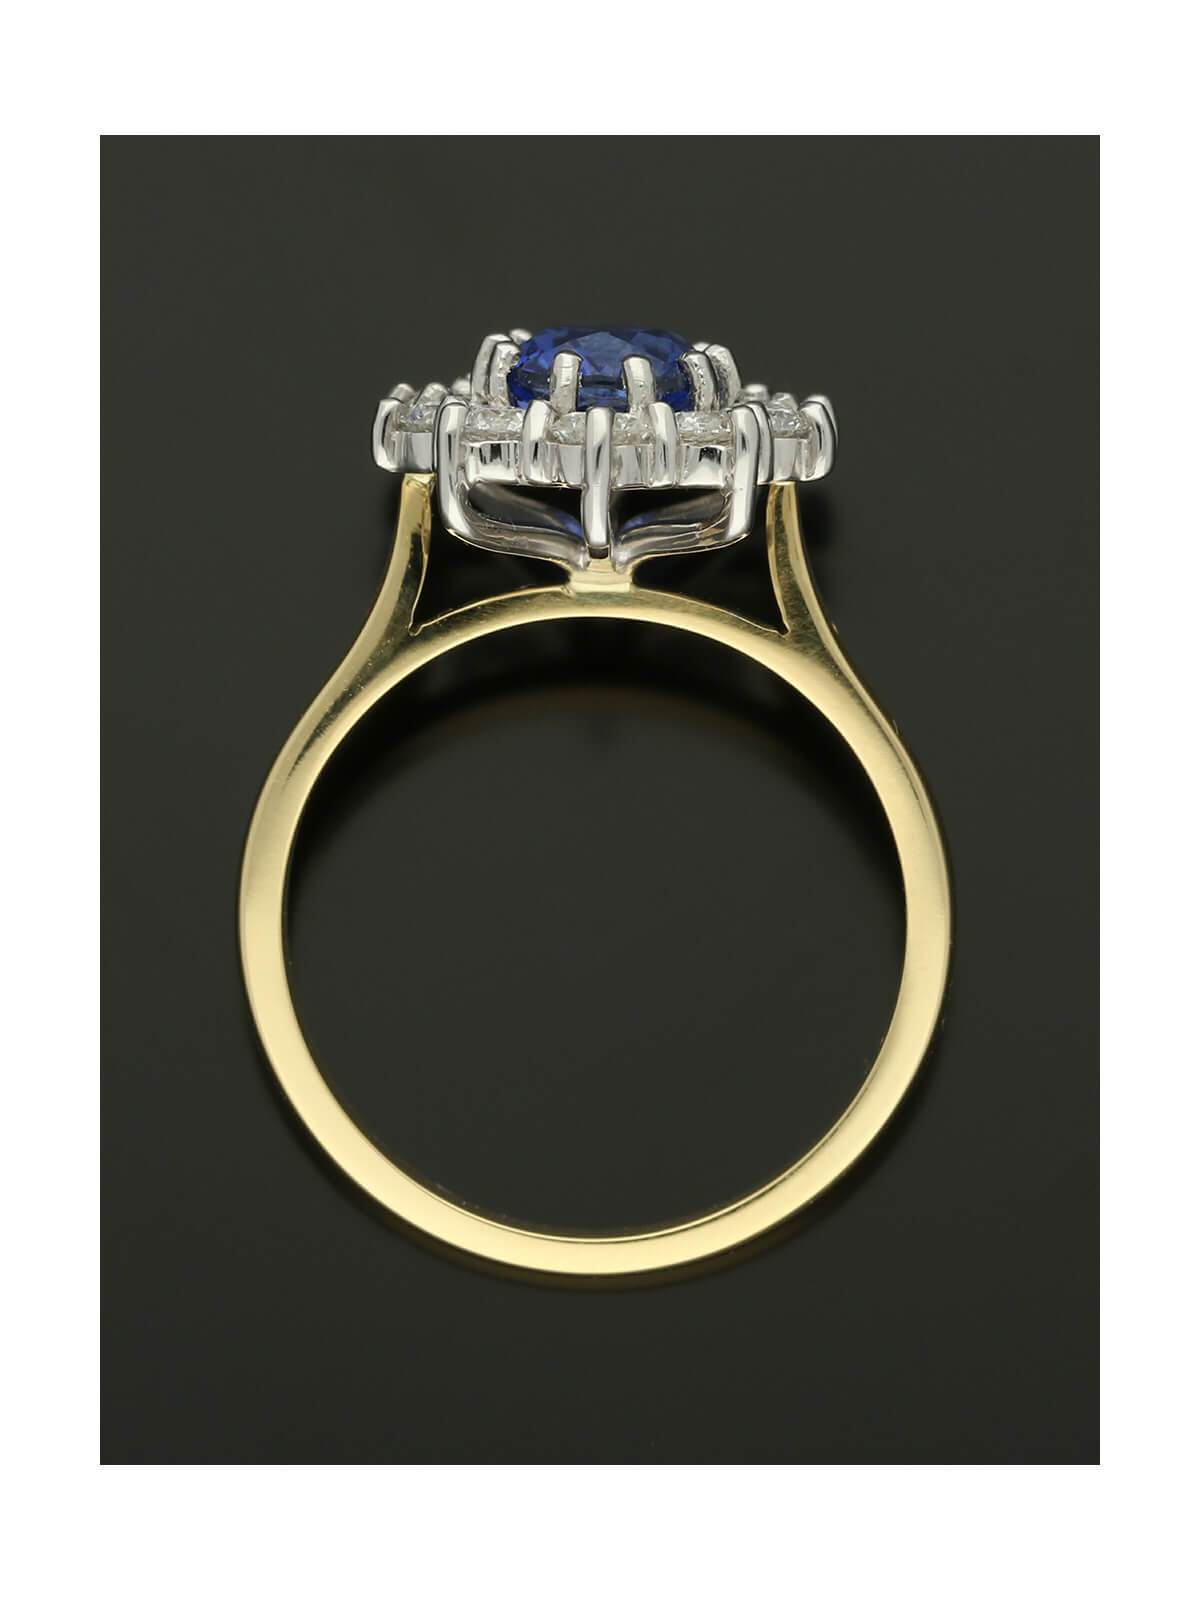 Sapphire & Diamond Cluster Ring in 18ct Yellow & White Gold